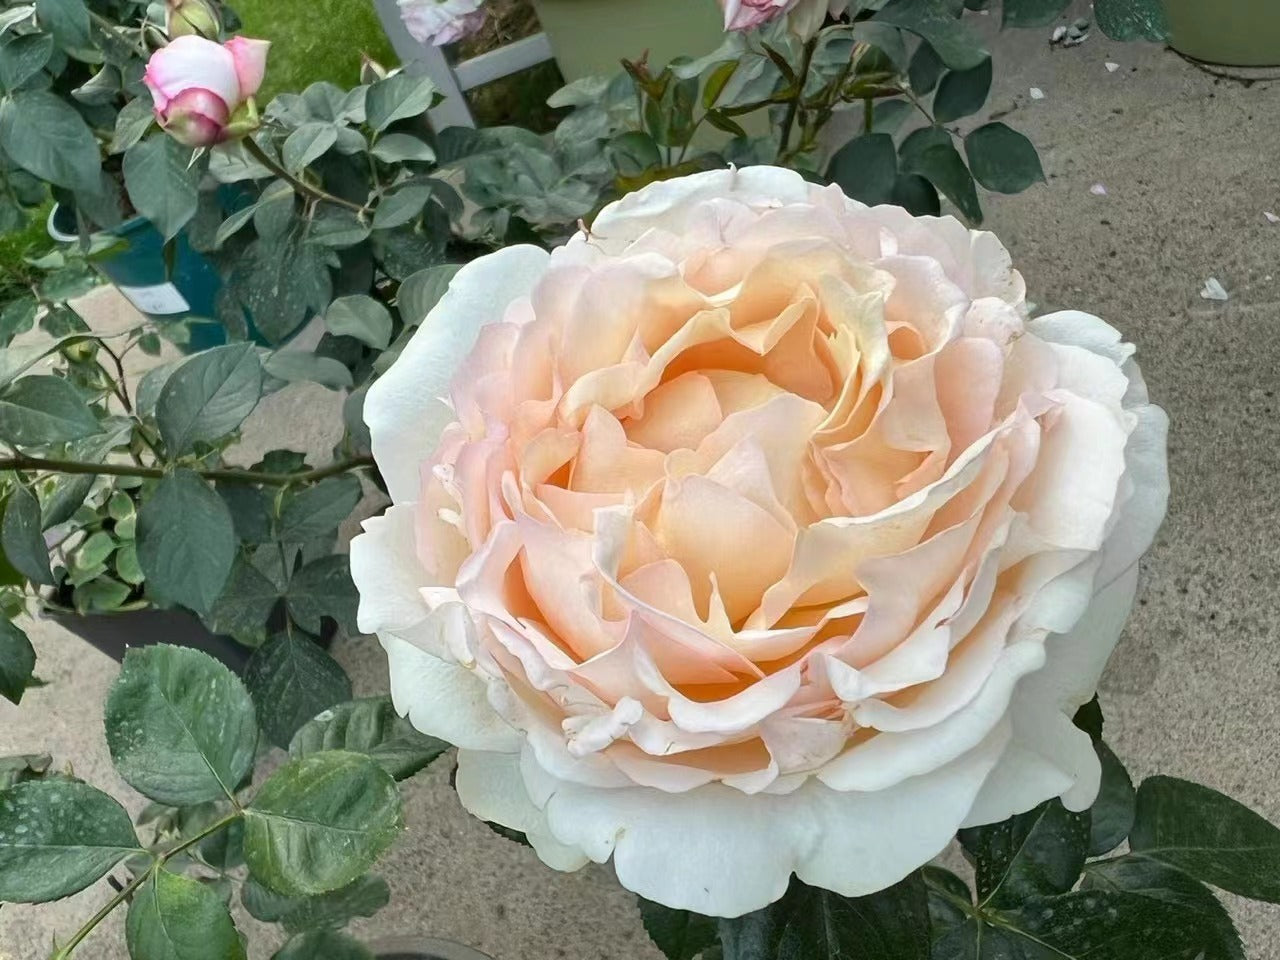 Yves Rose[Gold Yves Piaget]- 3 Gallon++ OwnRoot Live Plant| Ruffle lace| 伊芙金伯爵| Long flowering period| Easy to Grow|Intense Fragrance